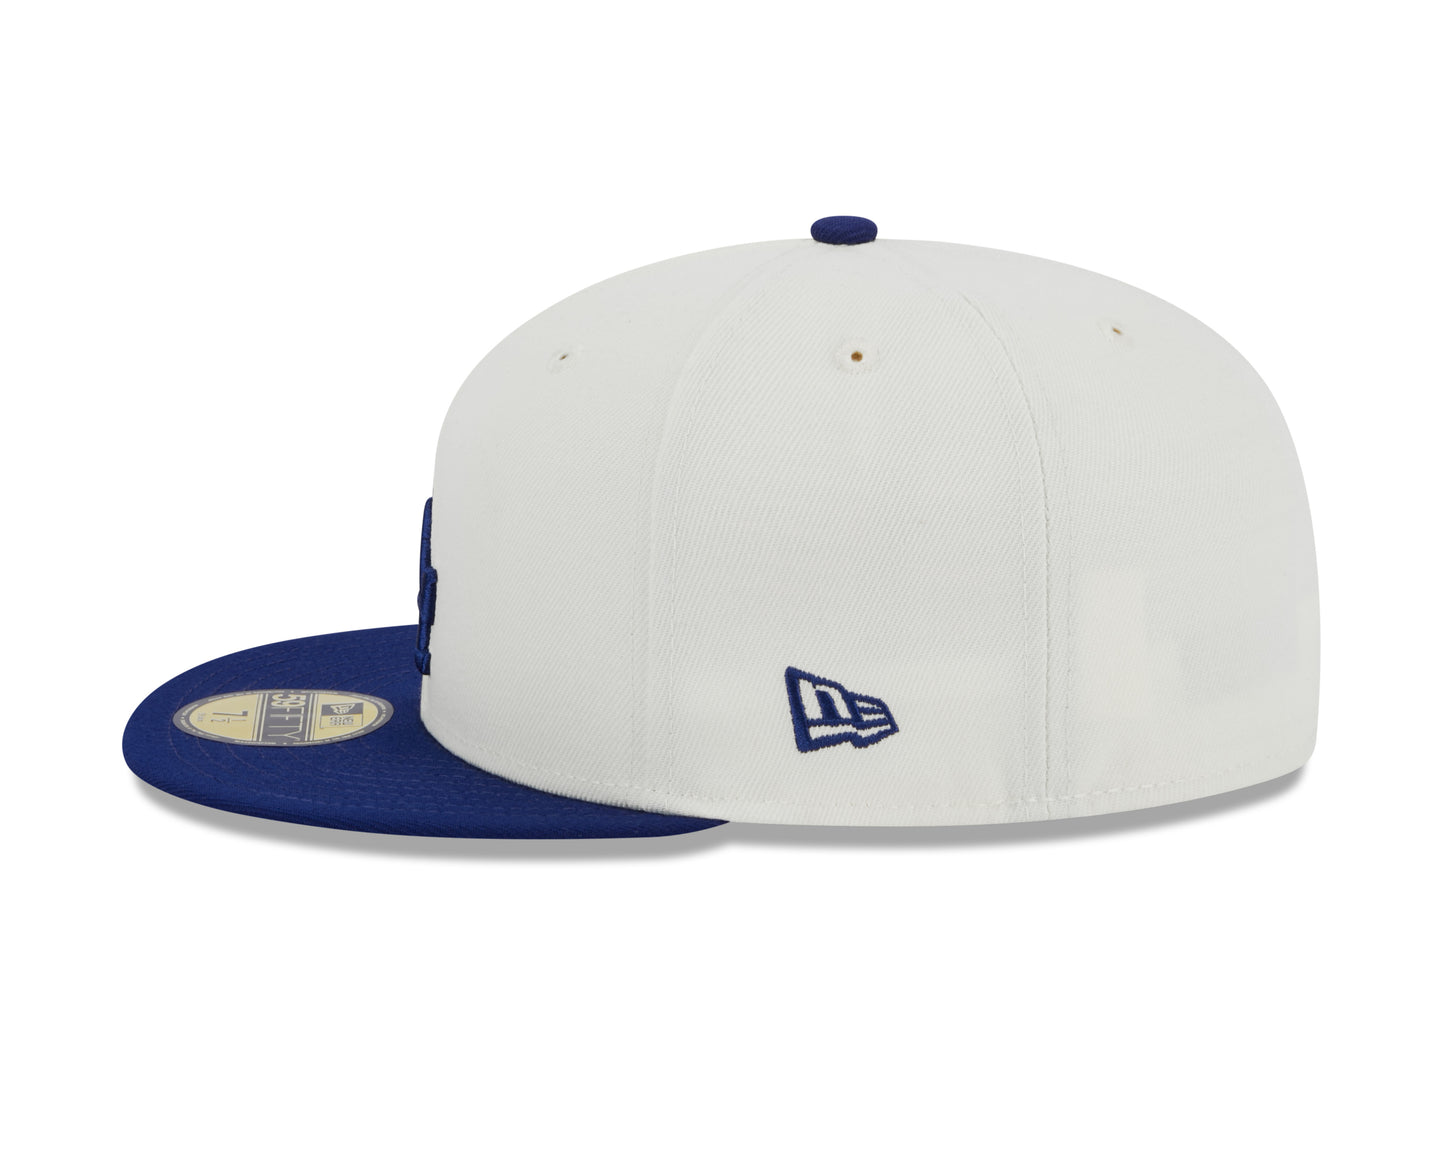 Los Angeles Dodgers 1988 World Series Cream/Royal New Era Retro 59FIFTY Fitted Hat